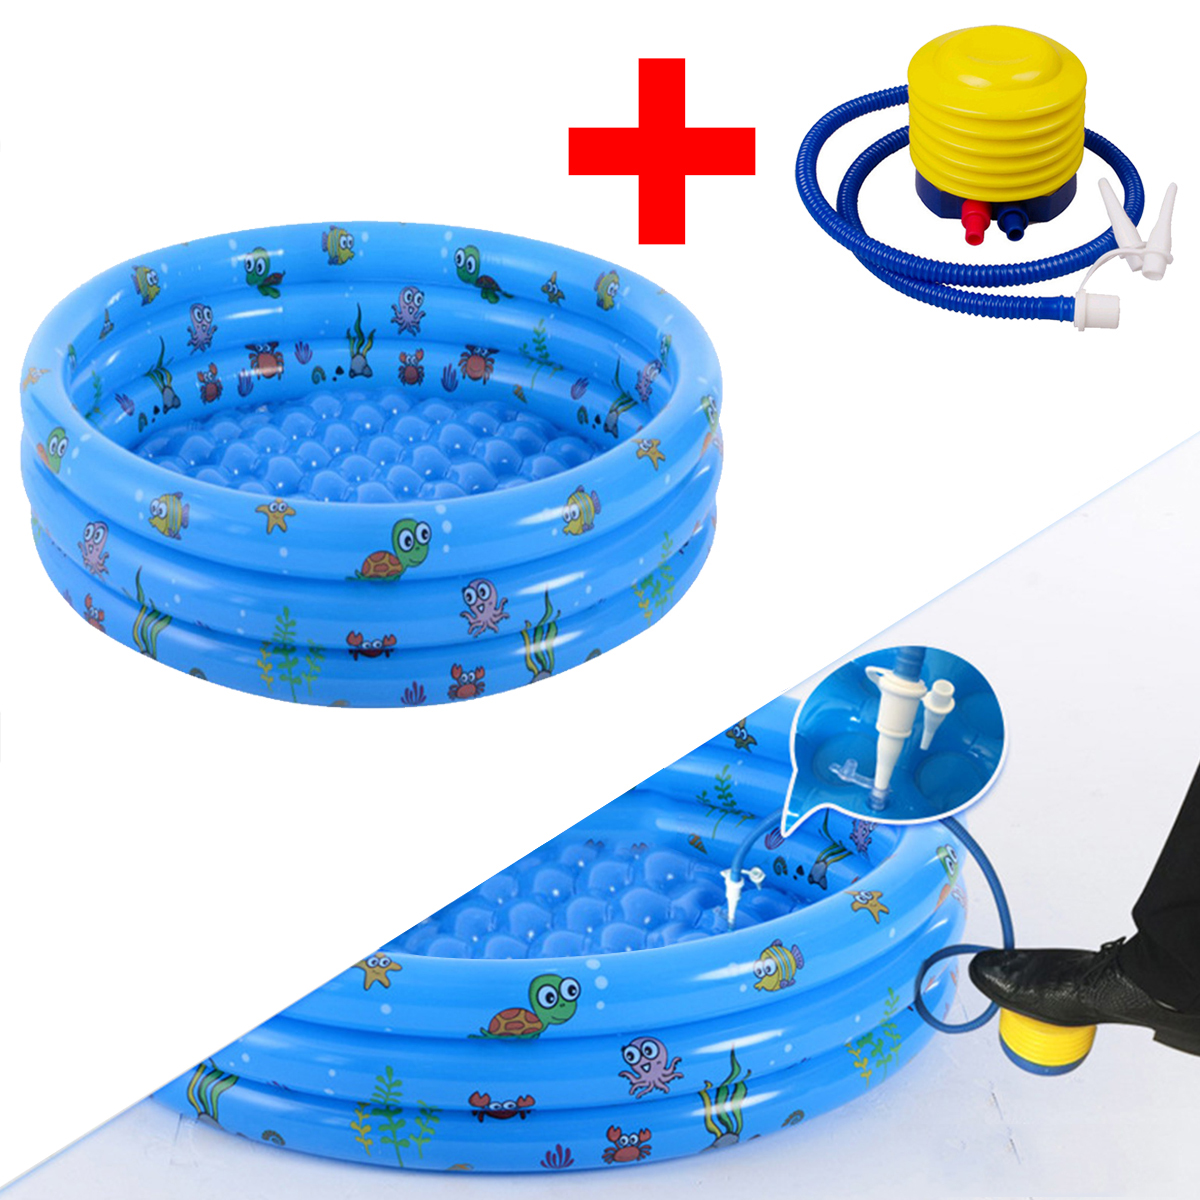 130150CM-Swimming-Pool-Childrens-Baby-Paddling-Pool-Round-Bubble-Bottom-Inflatable-Pool-with-Air-Pum-1815393-5